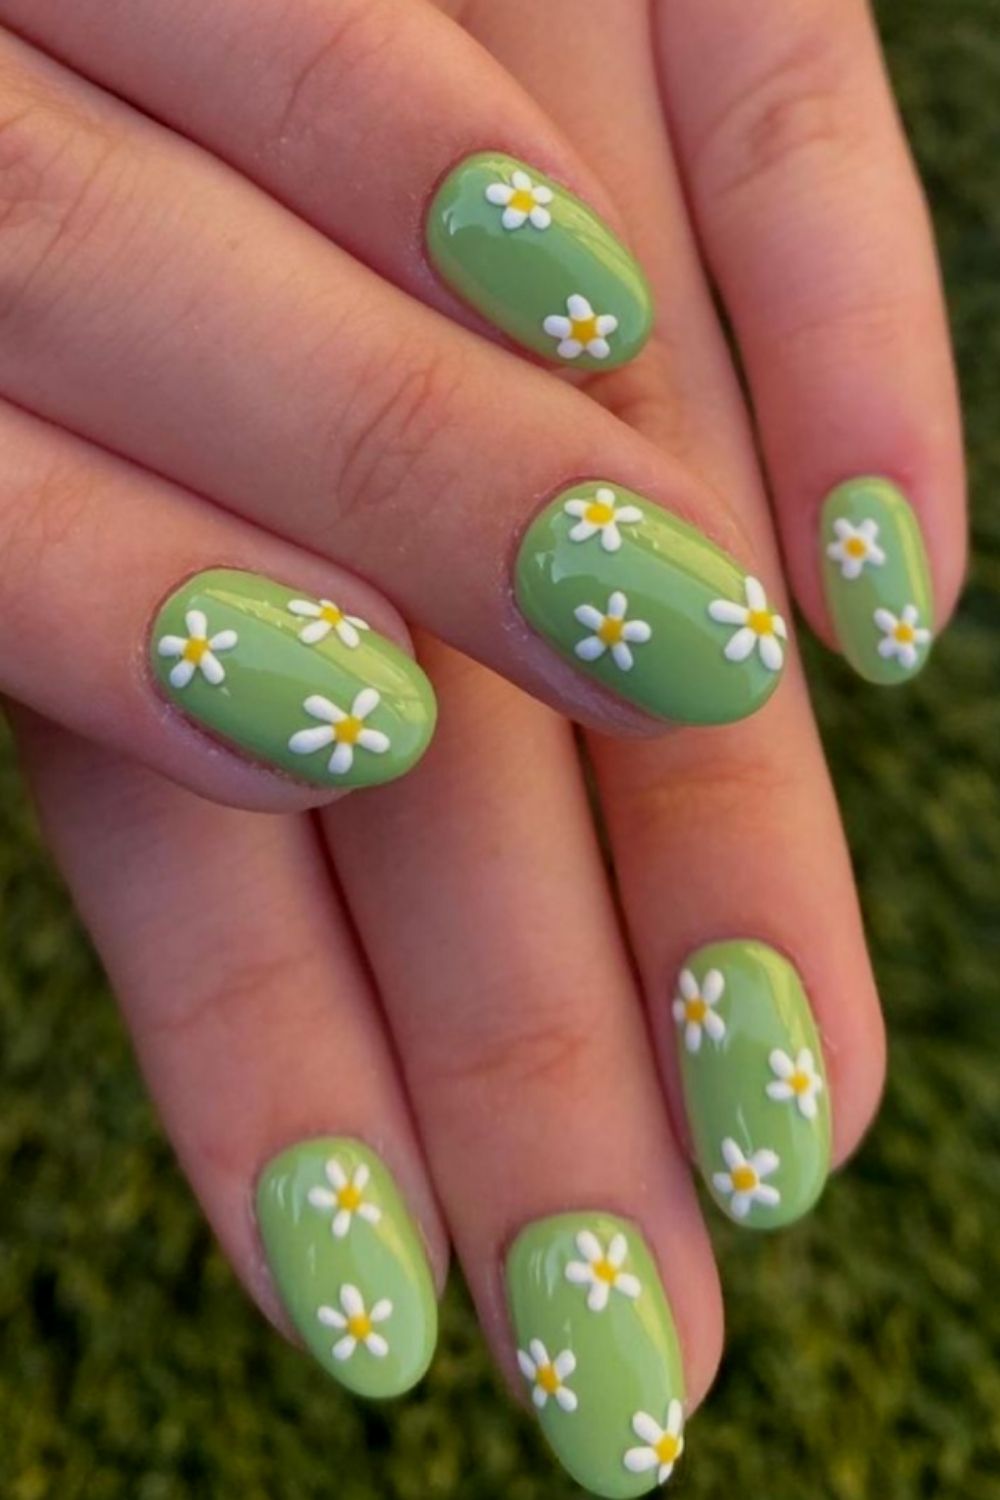 Cute Summer Nails Design with Acrylic Nail Shape in 2021